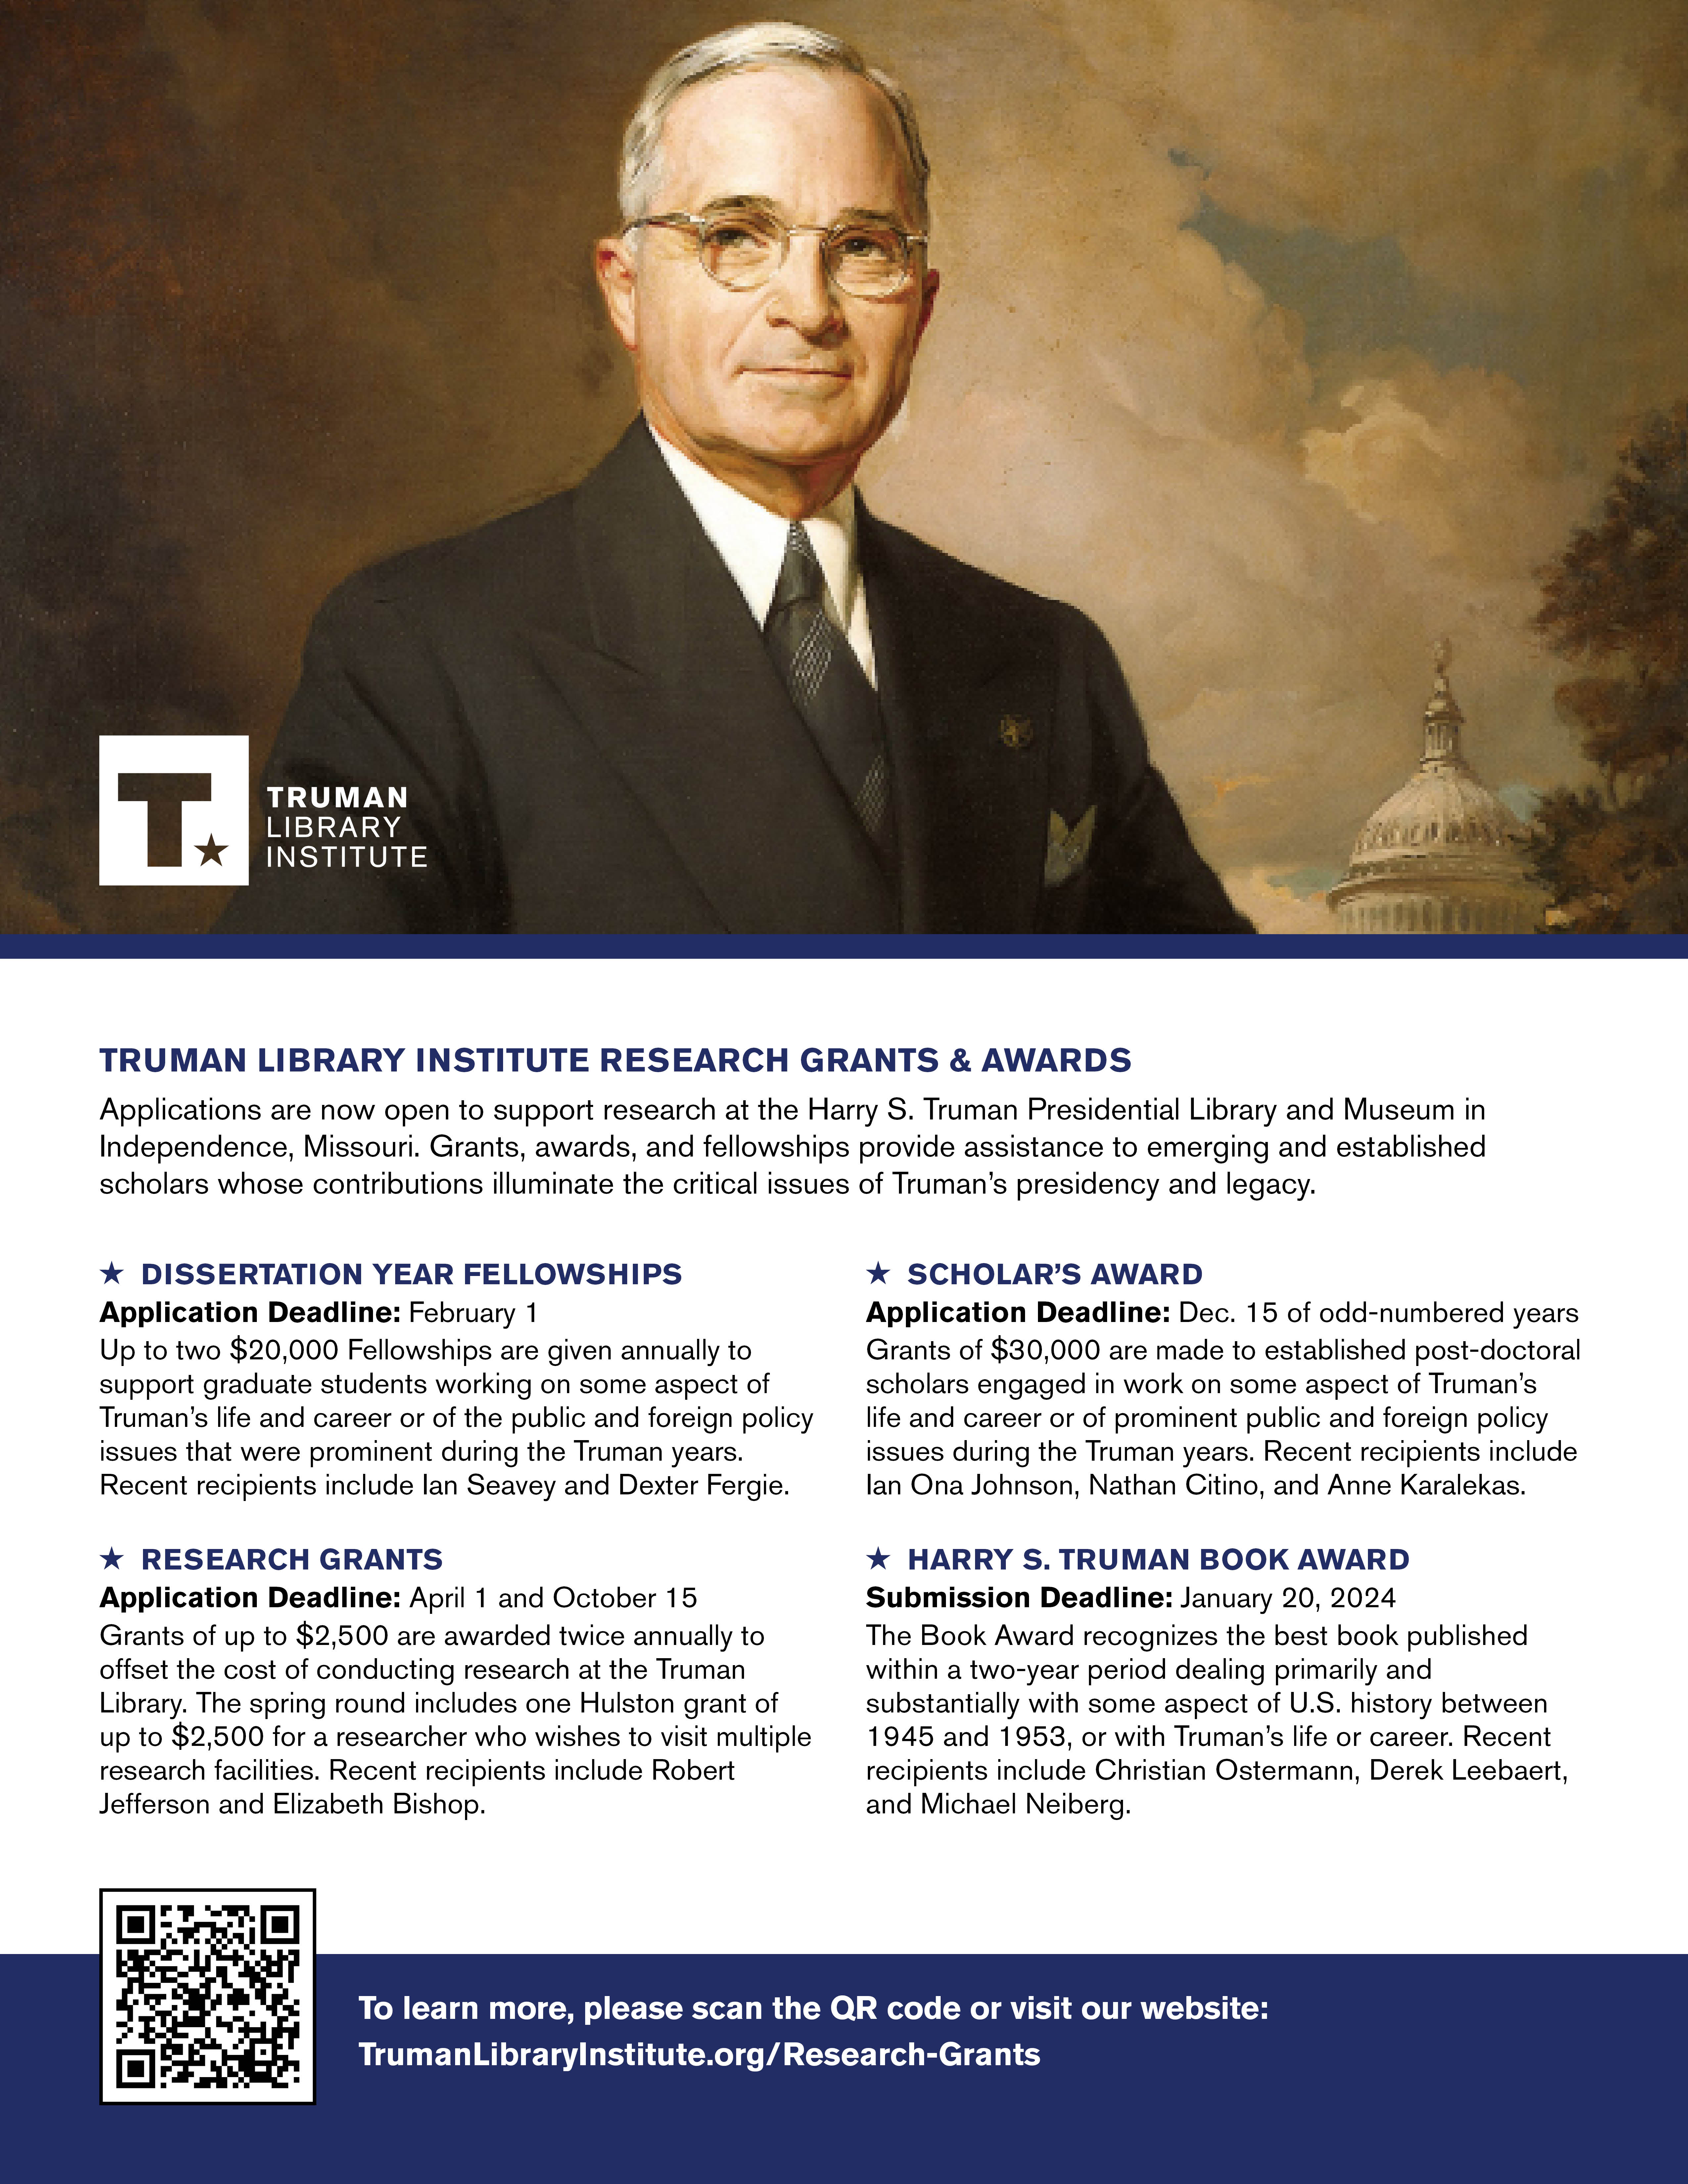 Truman Library Institute Research Grants & Awards flyer